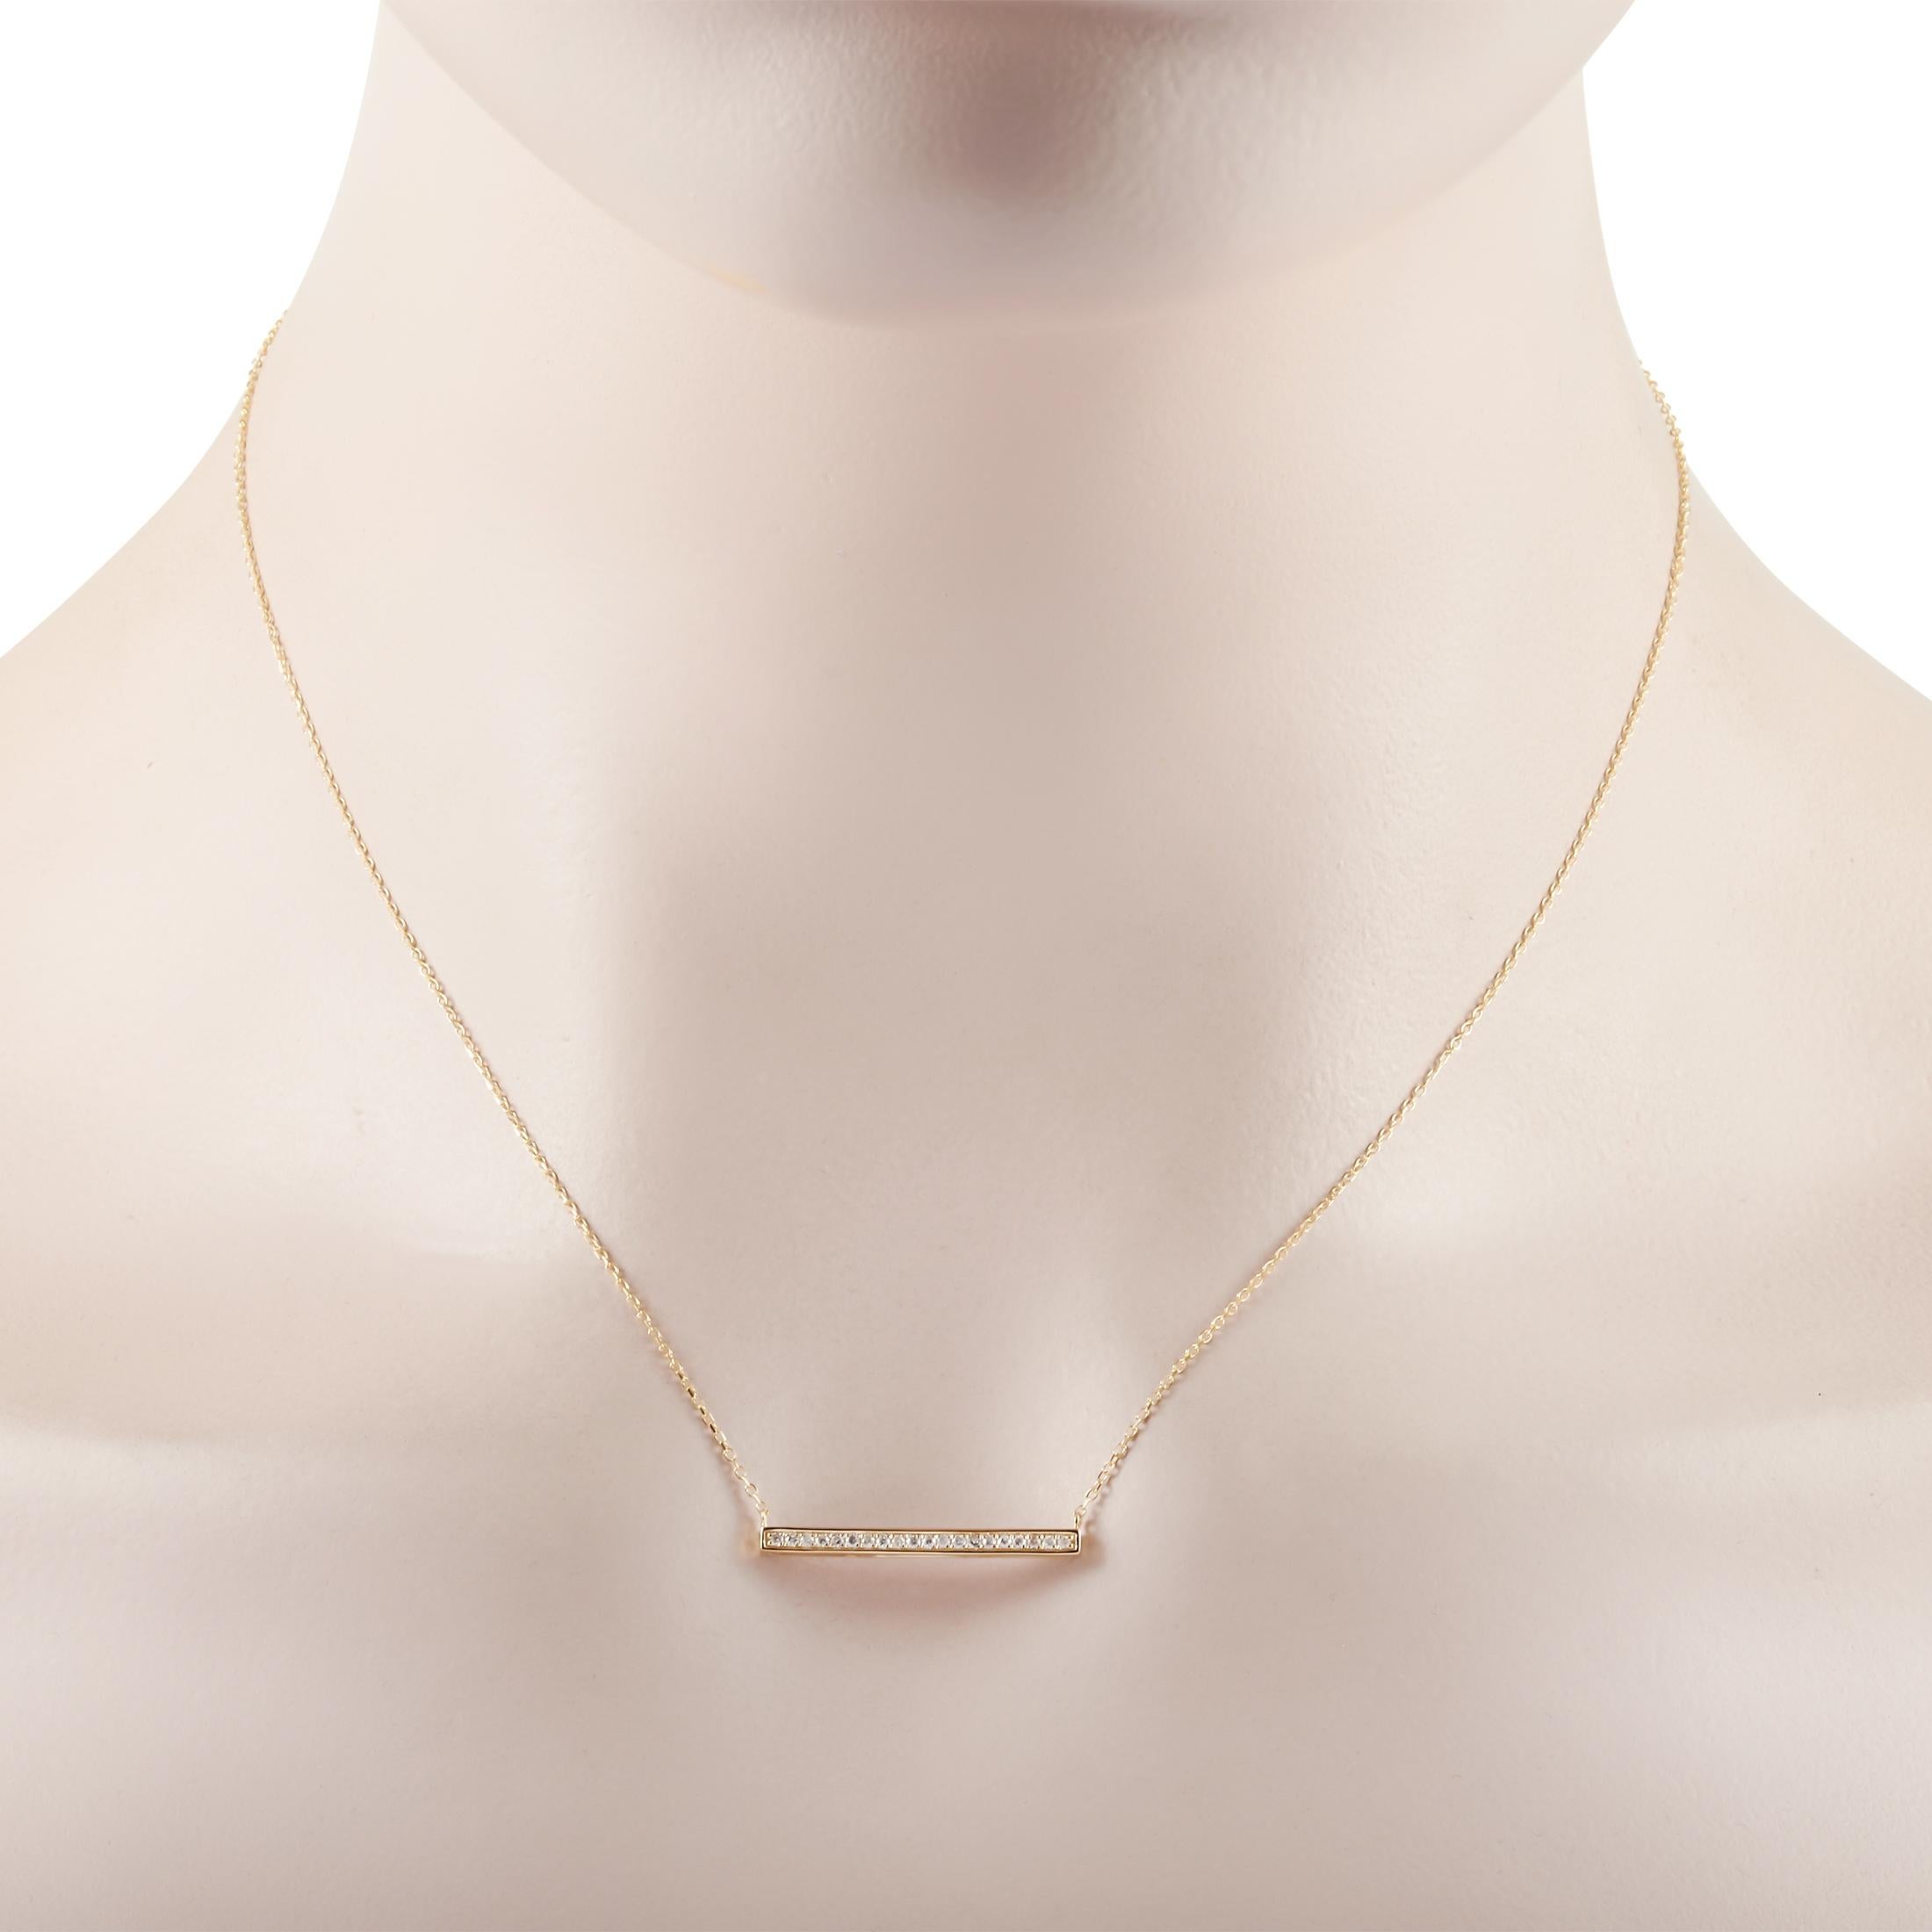 This LB Exclusive necklace is made of 14K yellow gold and embellished with diamonds that amount to 0.10 carats. The necklace weighs 1.8 grams and boasts a 15” chain and a pendant that measures 0.07” in length and 1” in width.
 
 Offered in brand new